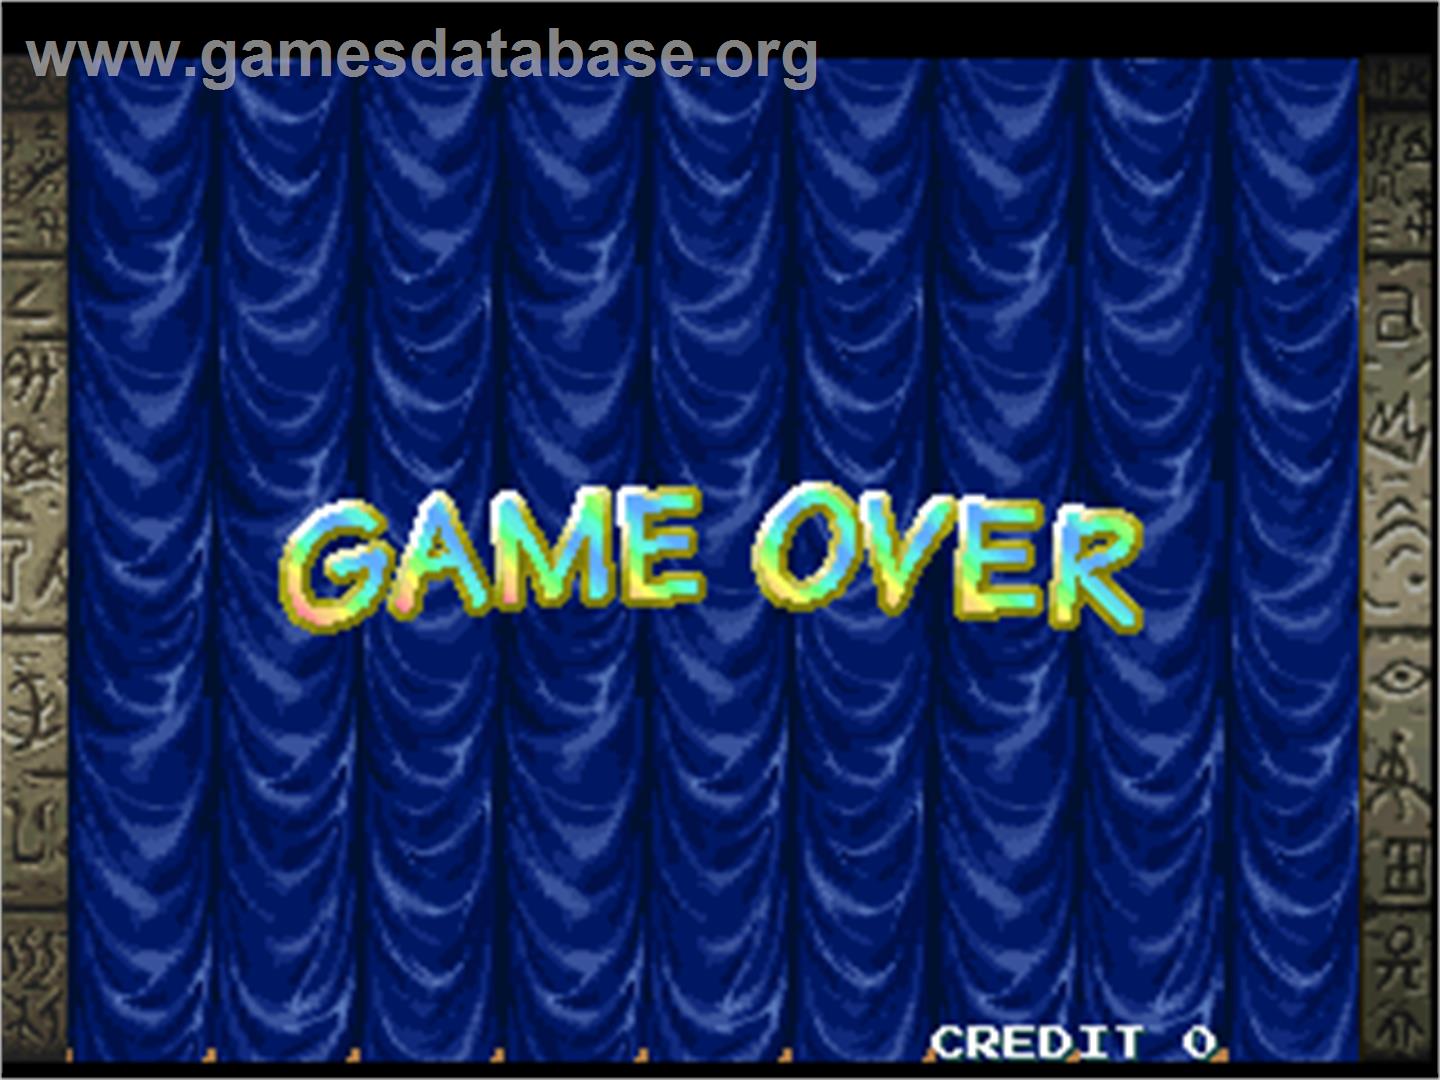 Point Blank 2 - Arcade - Artwork - Game Over Screen